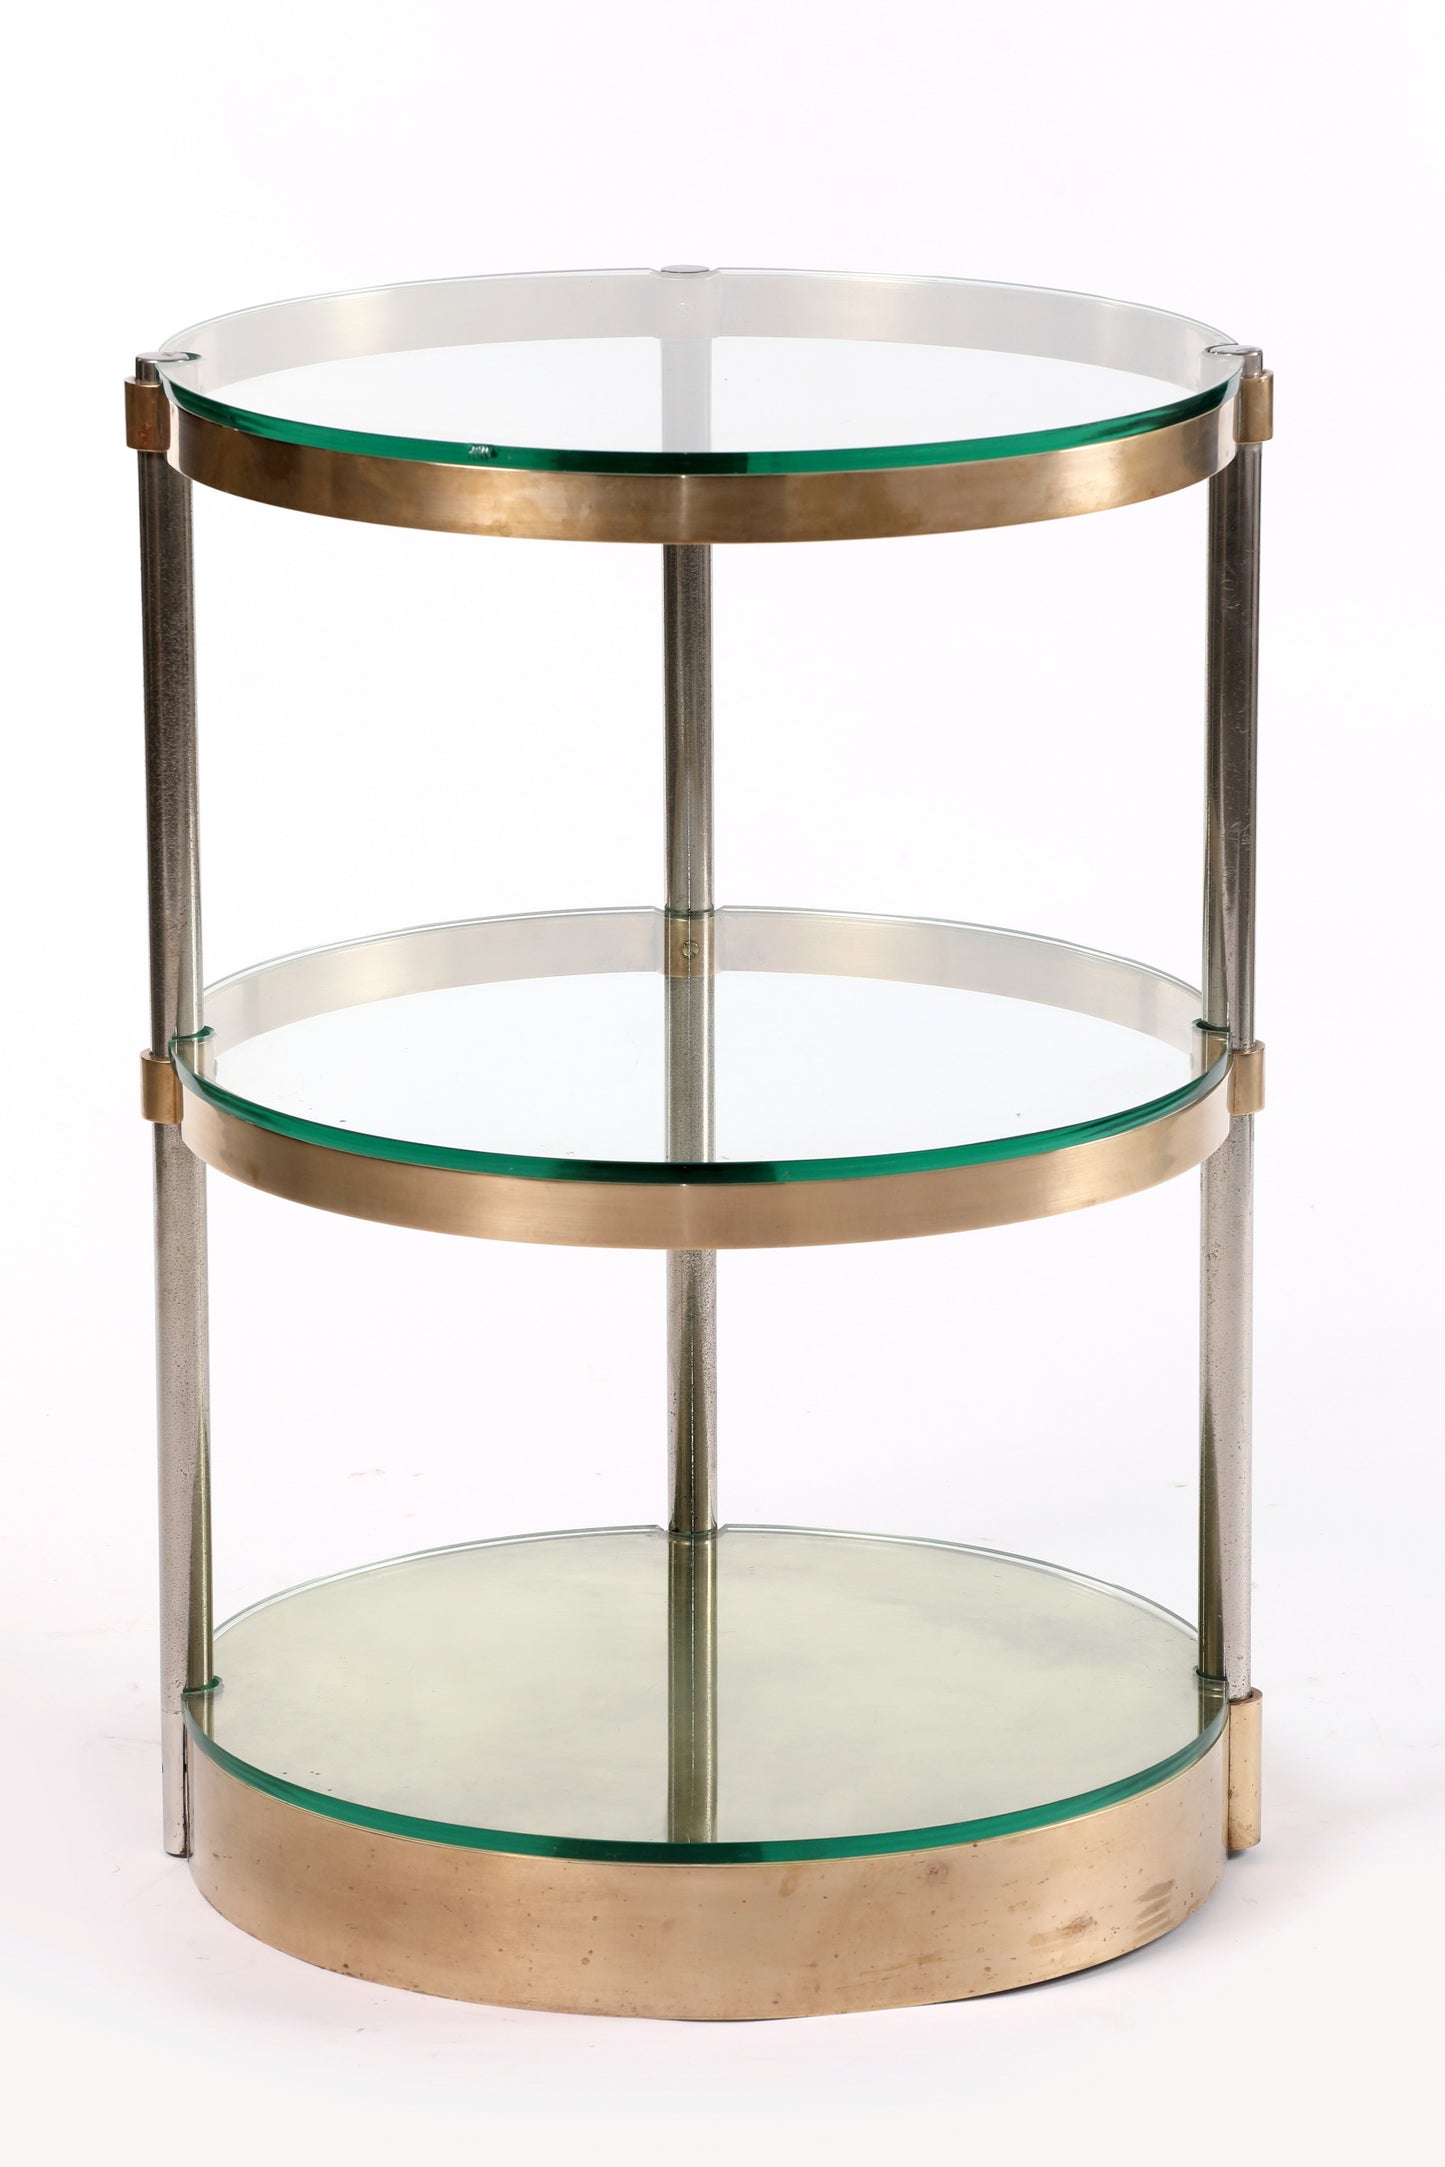 High table from the 70s in brass, steel and glass with three shelves